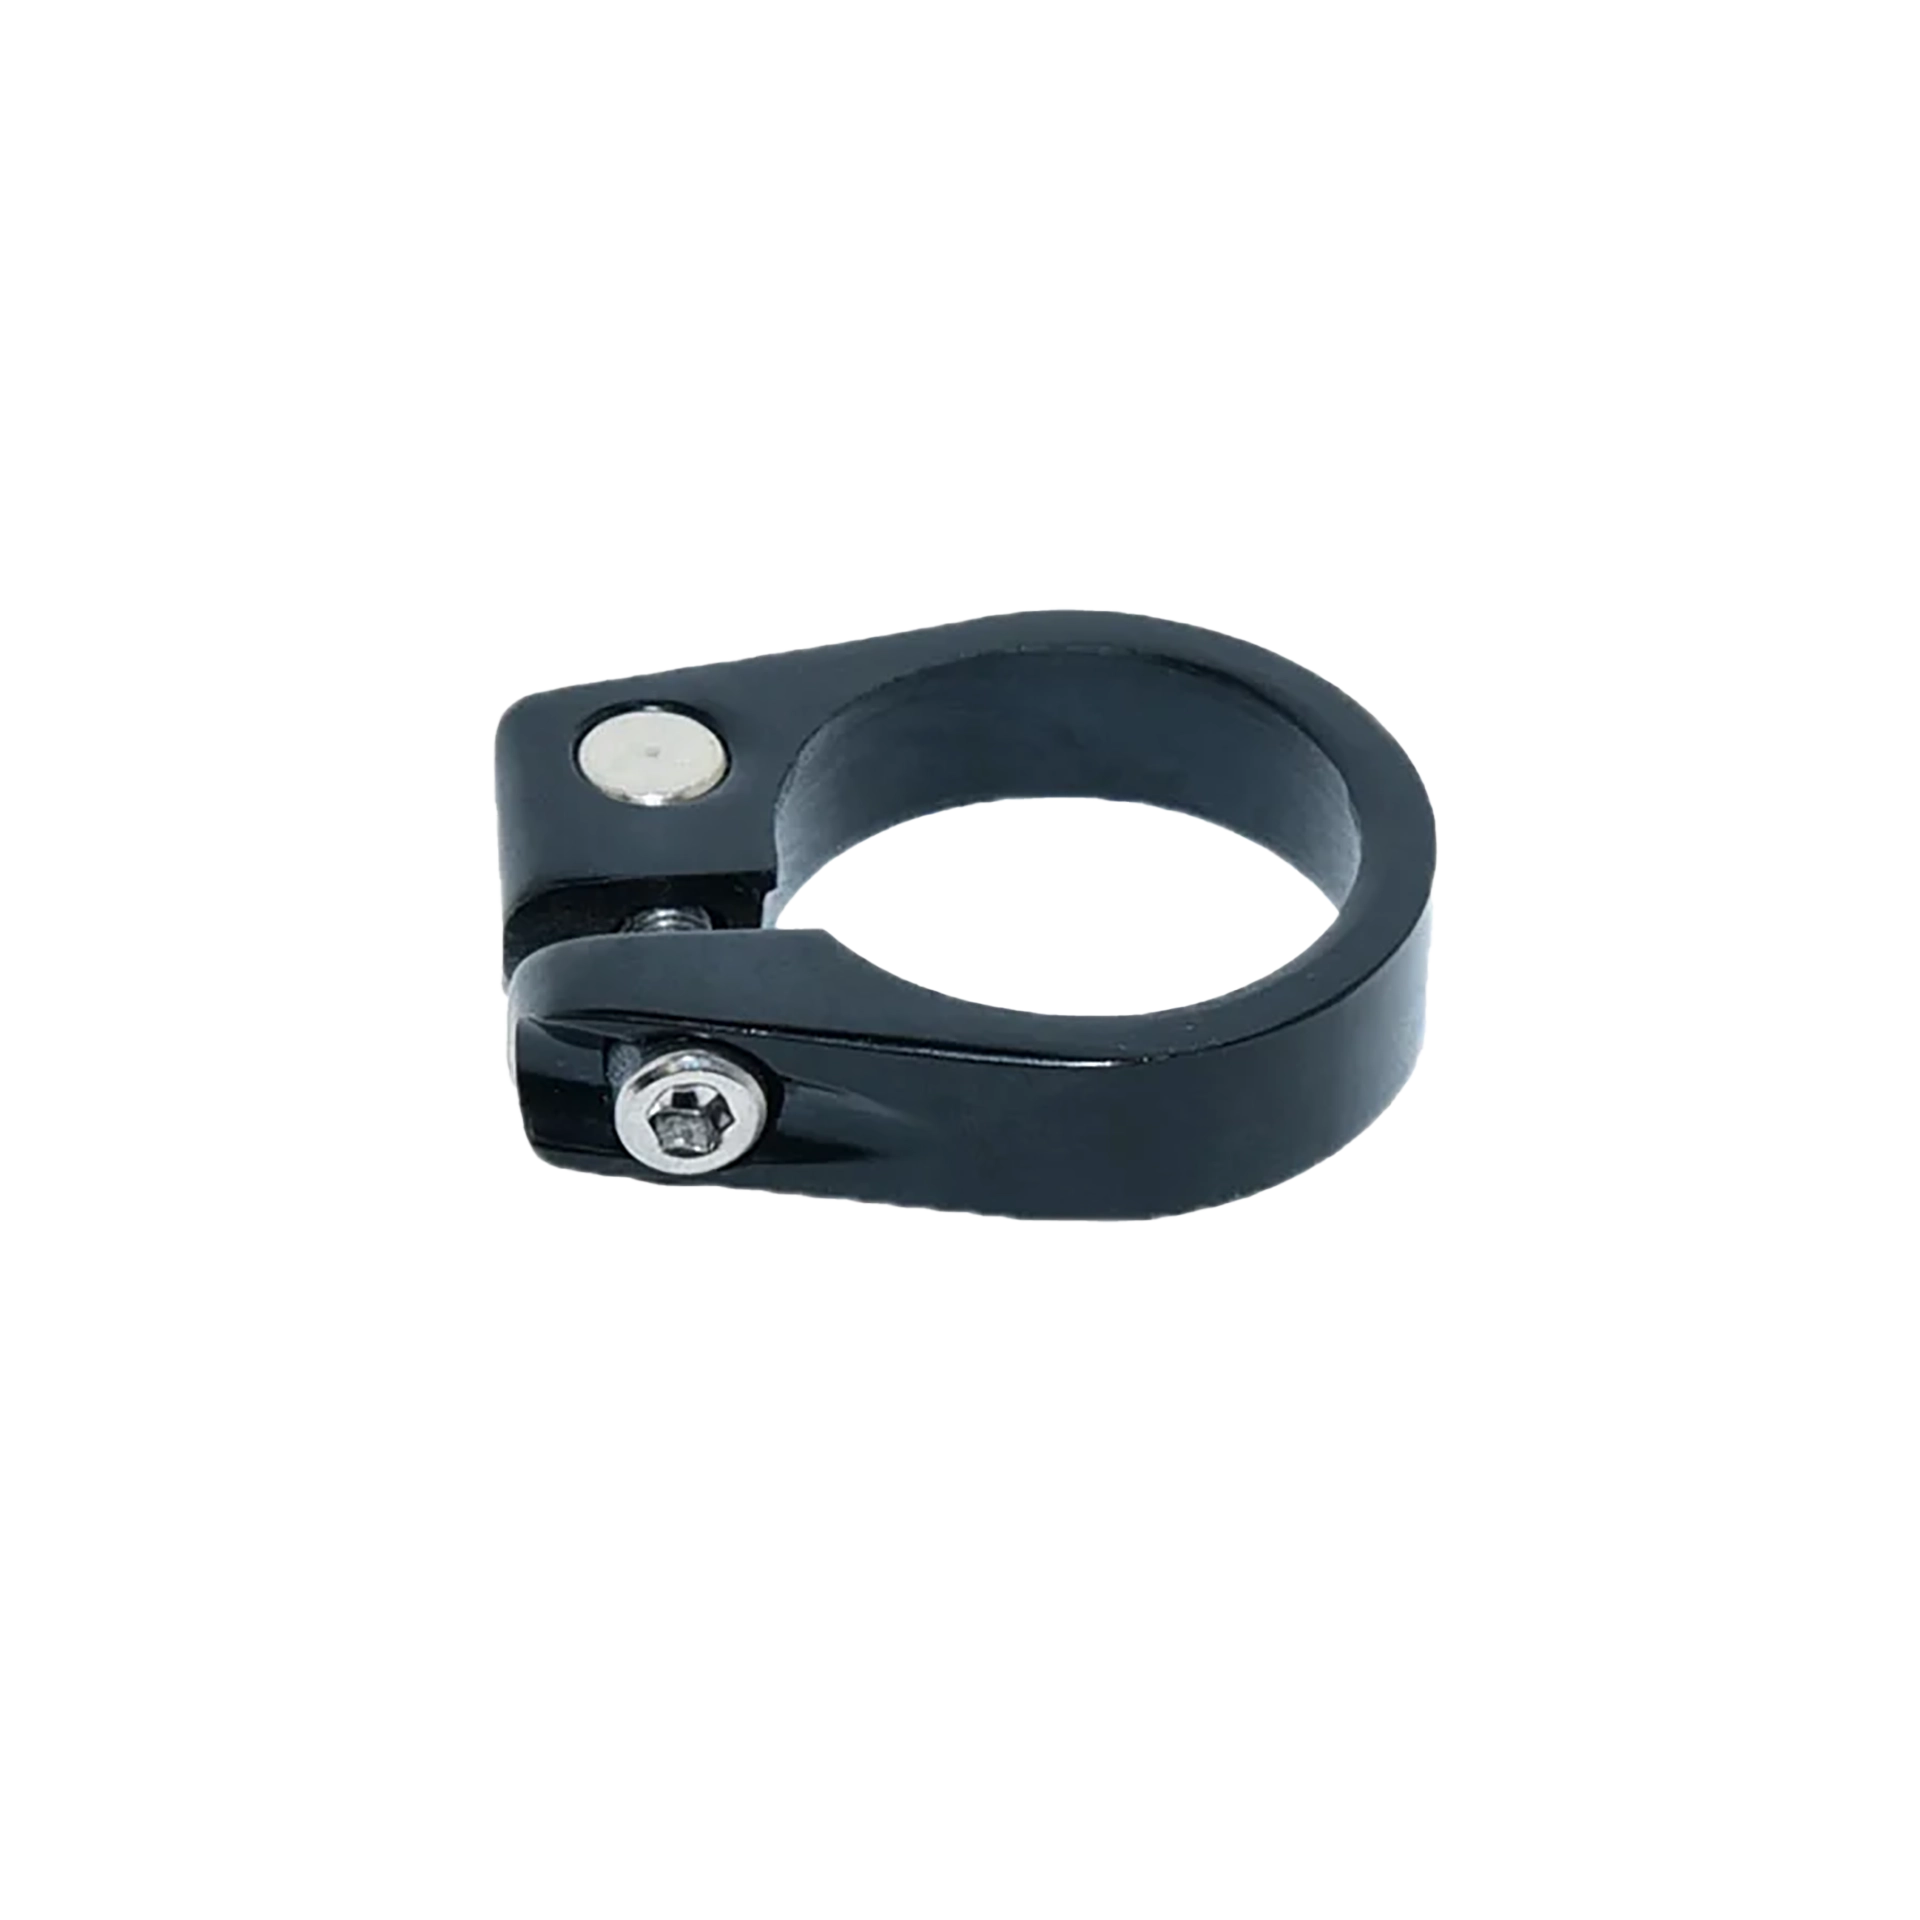 Seatclamp, 31.8, for seatpost size 27.2 Total